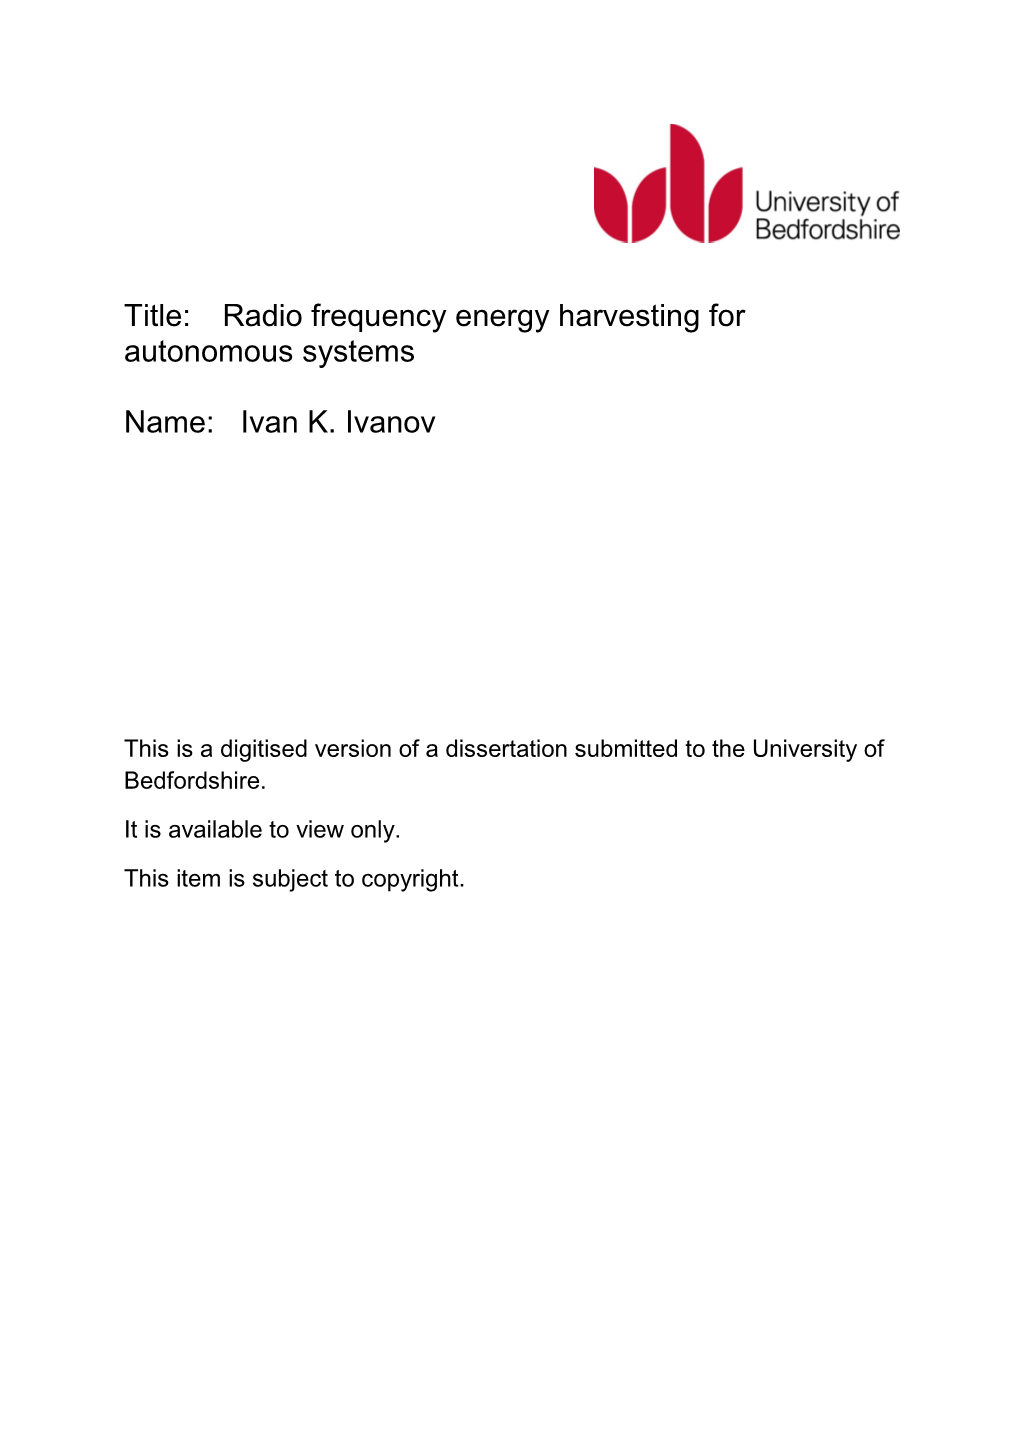 Title: Radio Frequency Energy Harvesting for Autonomous Systems